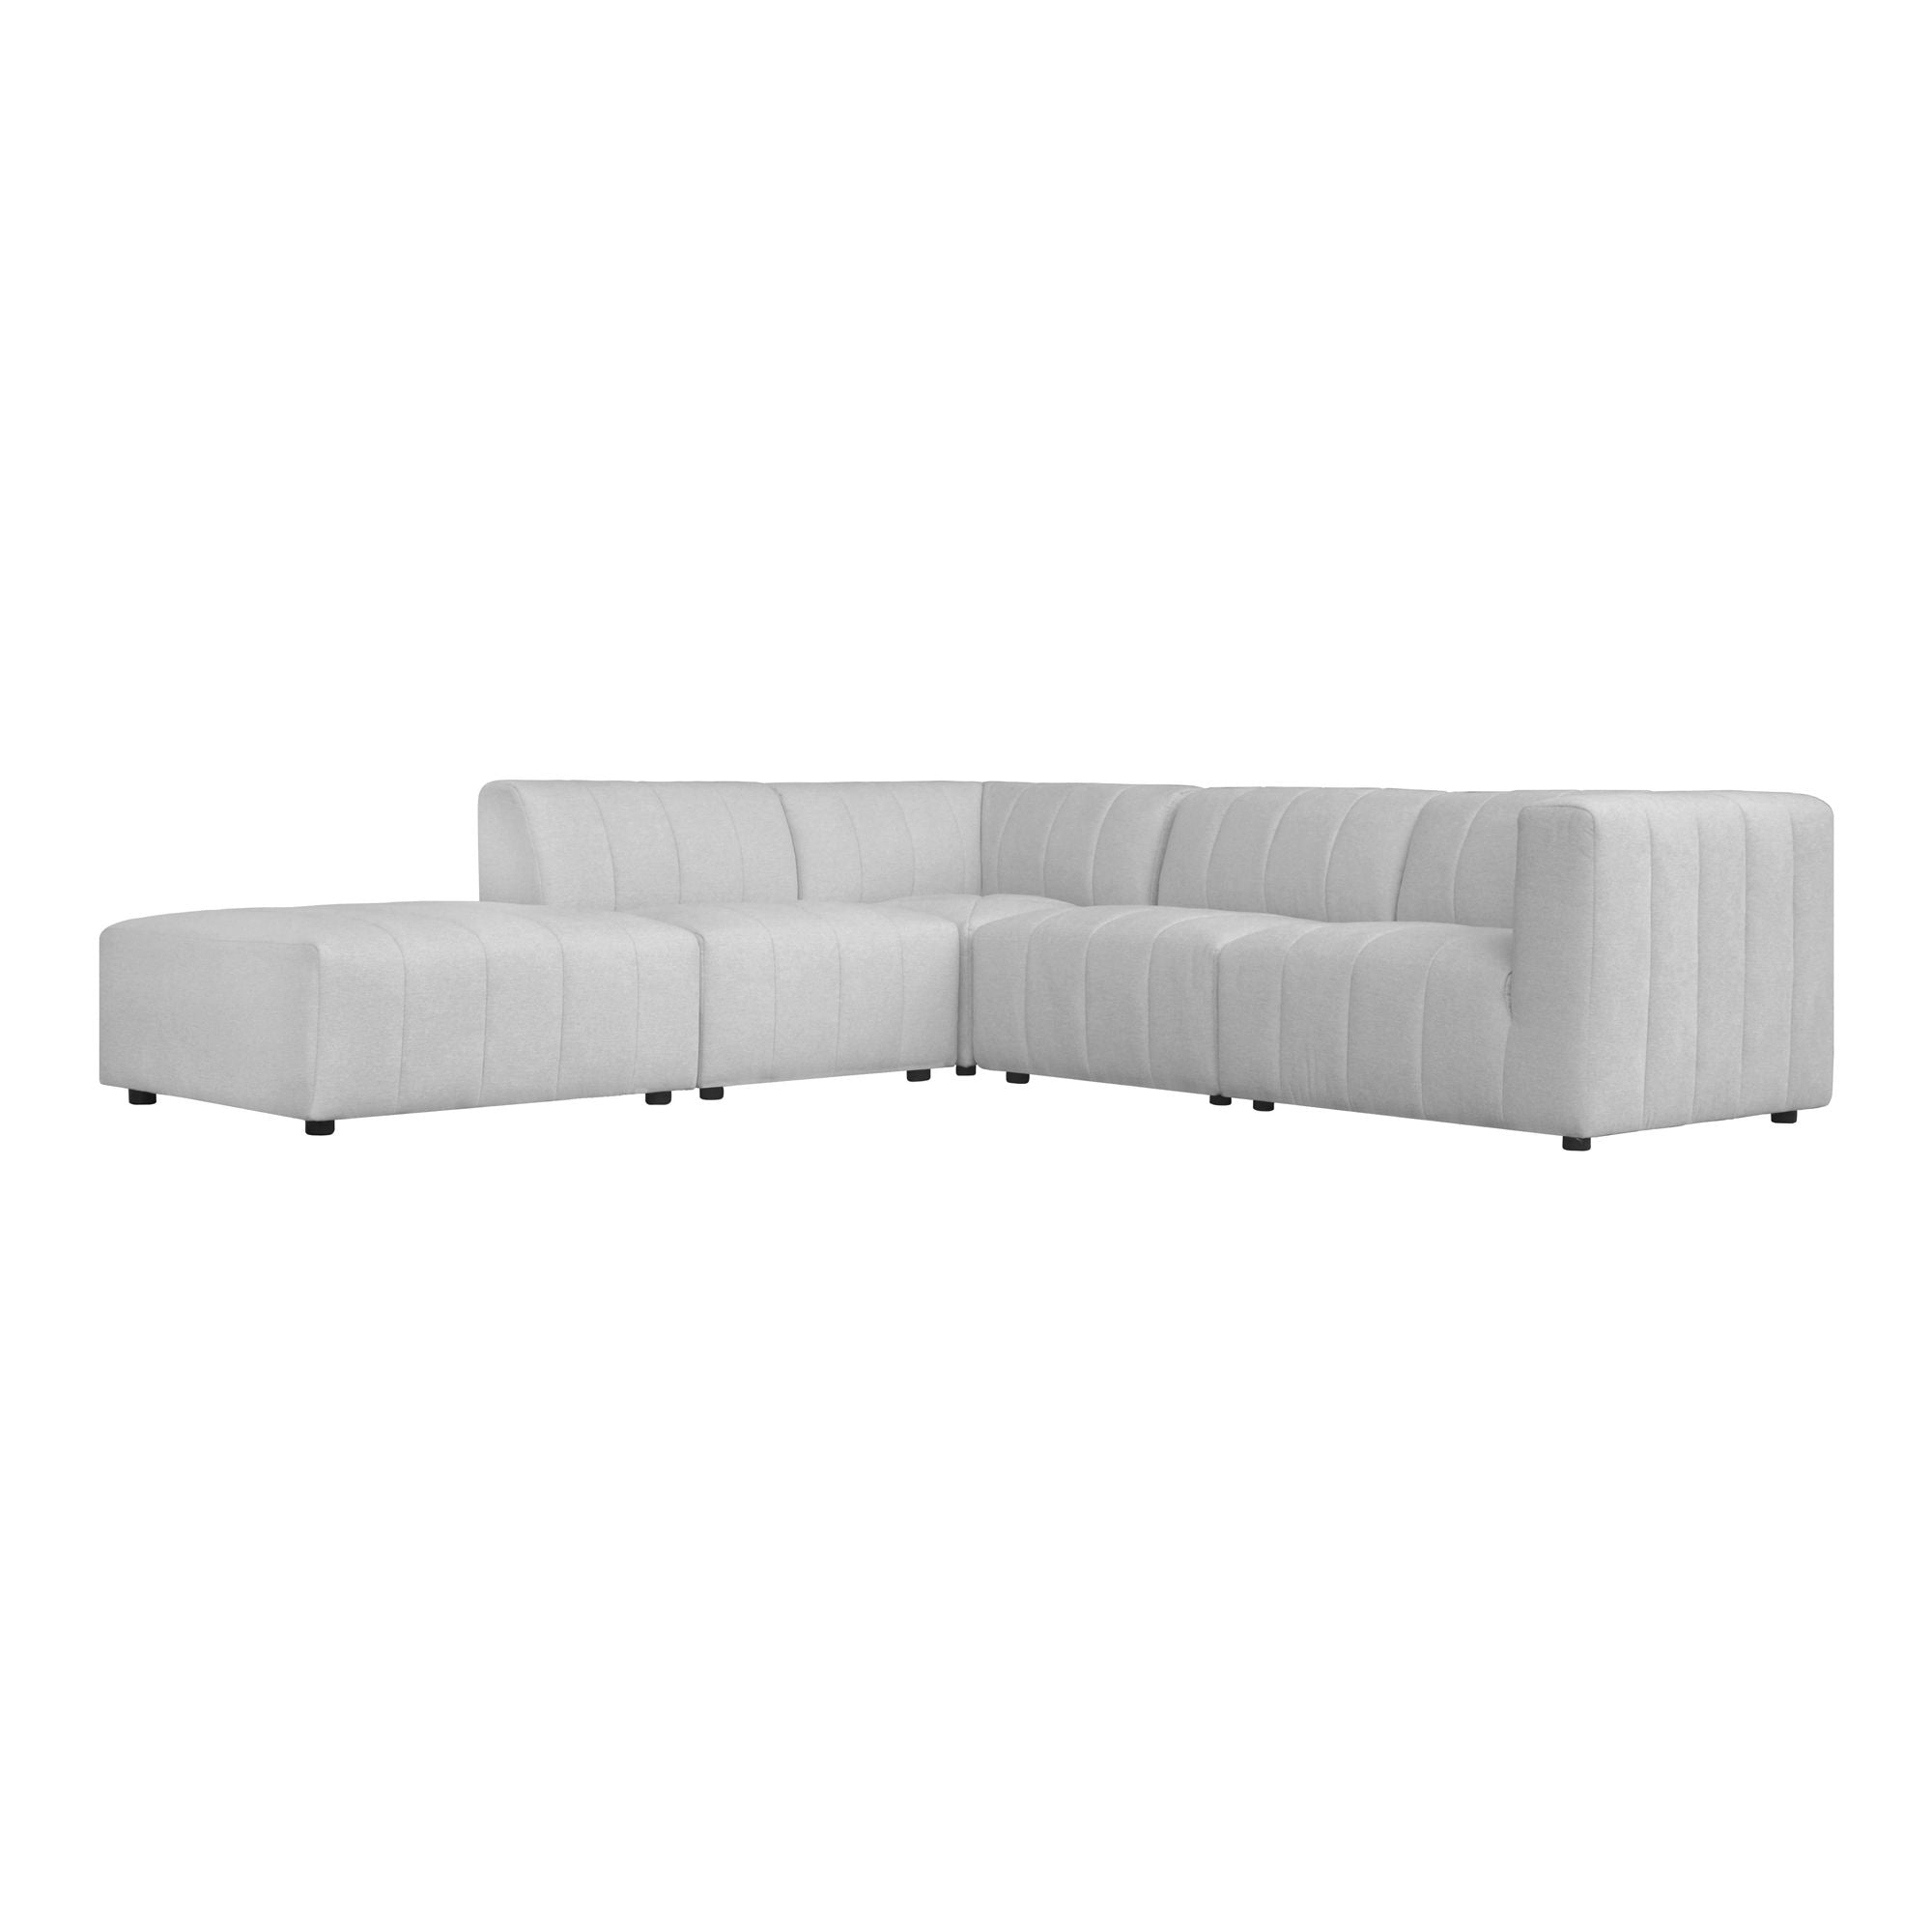 Lyric - Dream Modular Sectional Left Oatmeal - Pearl Silver-Stationary Sectionals-American Furniture Outlet